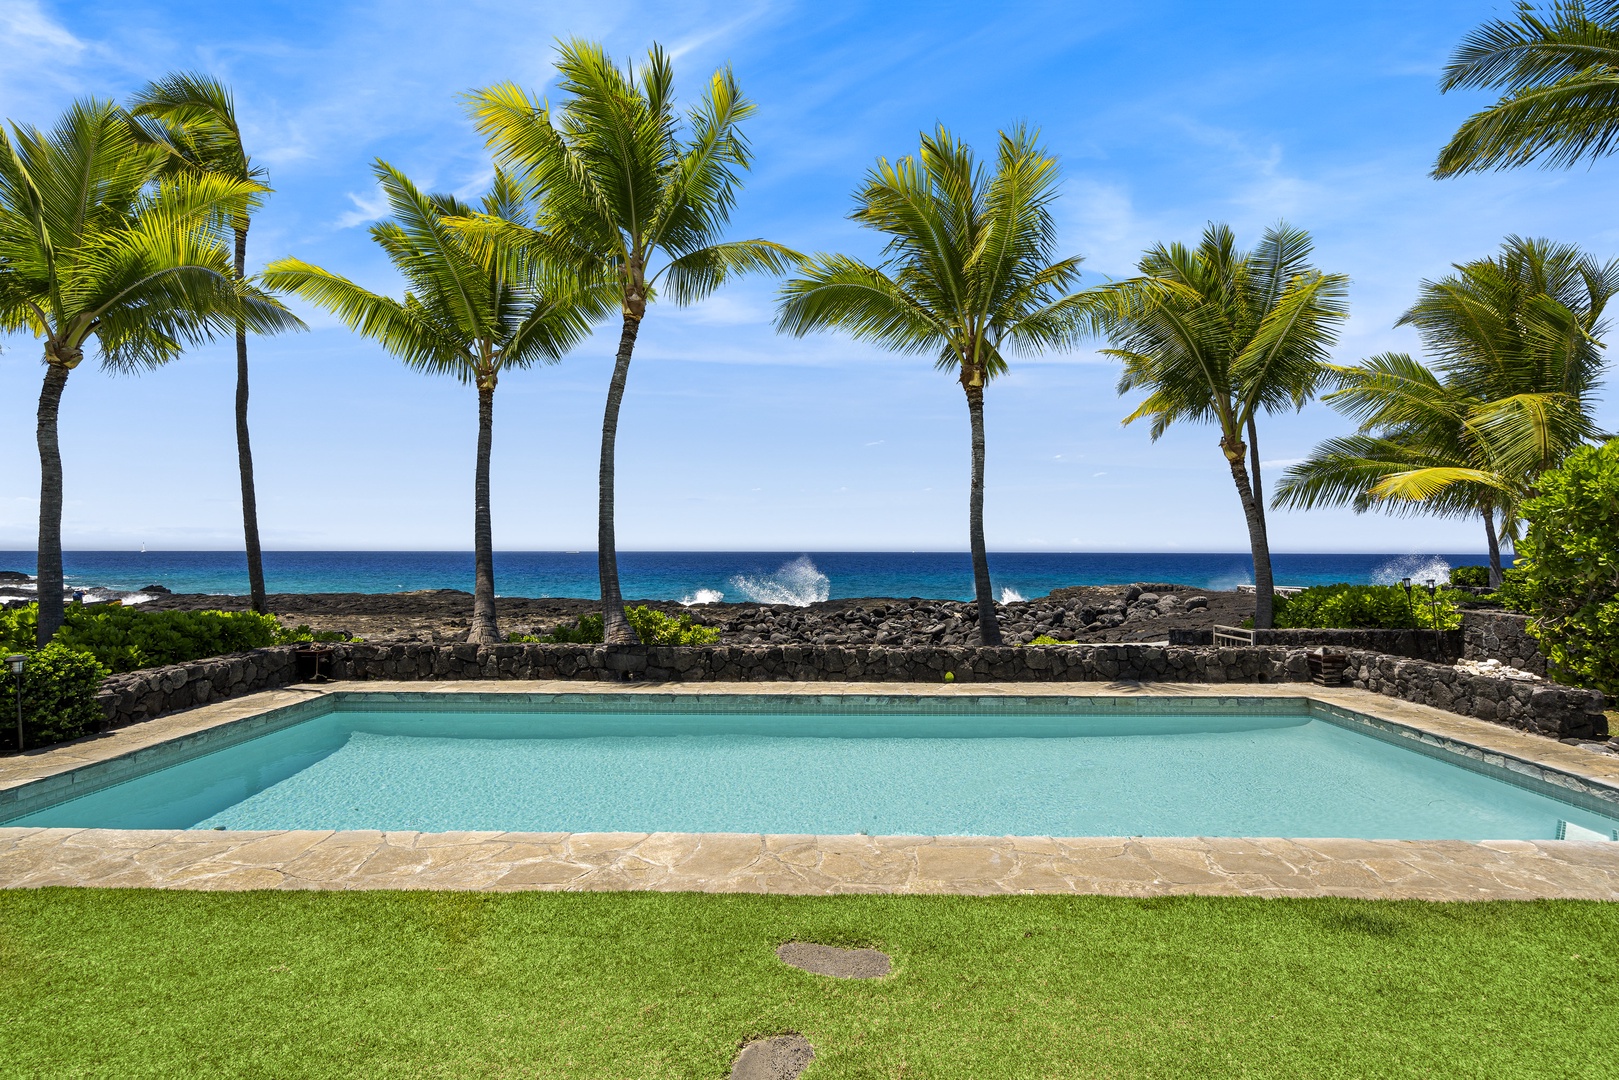 Kailua Kona Vacation Rentals, Kona Blue - Worthy of a postcard is how many have described the views from the back yard